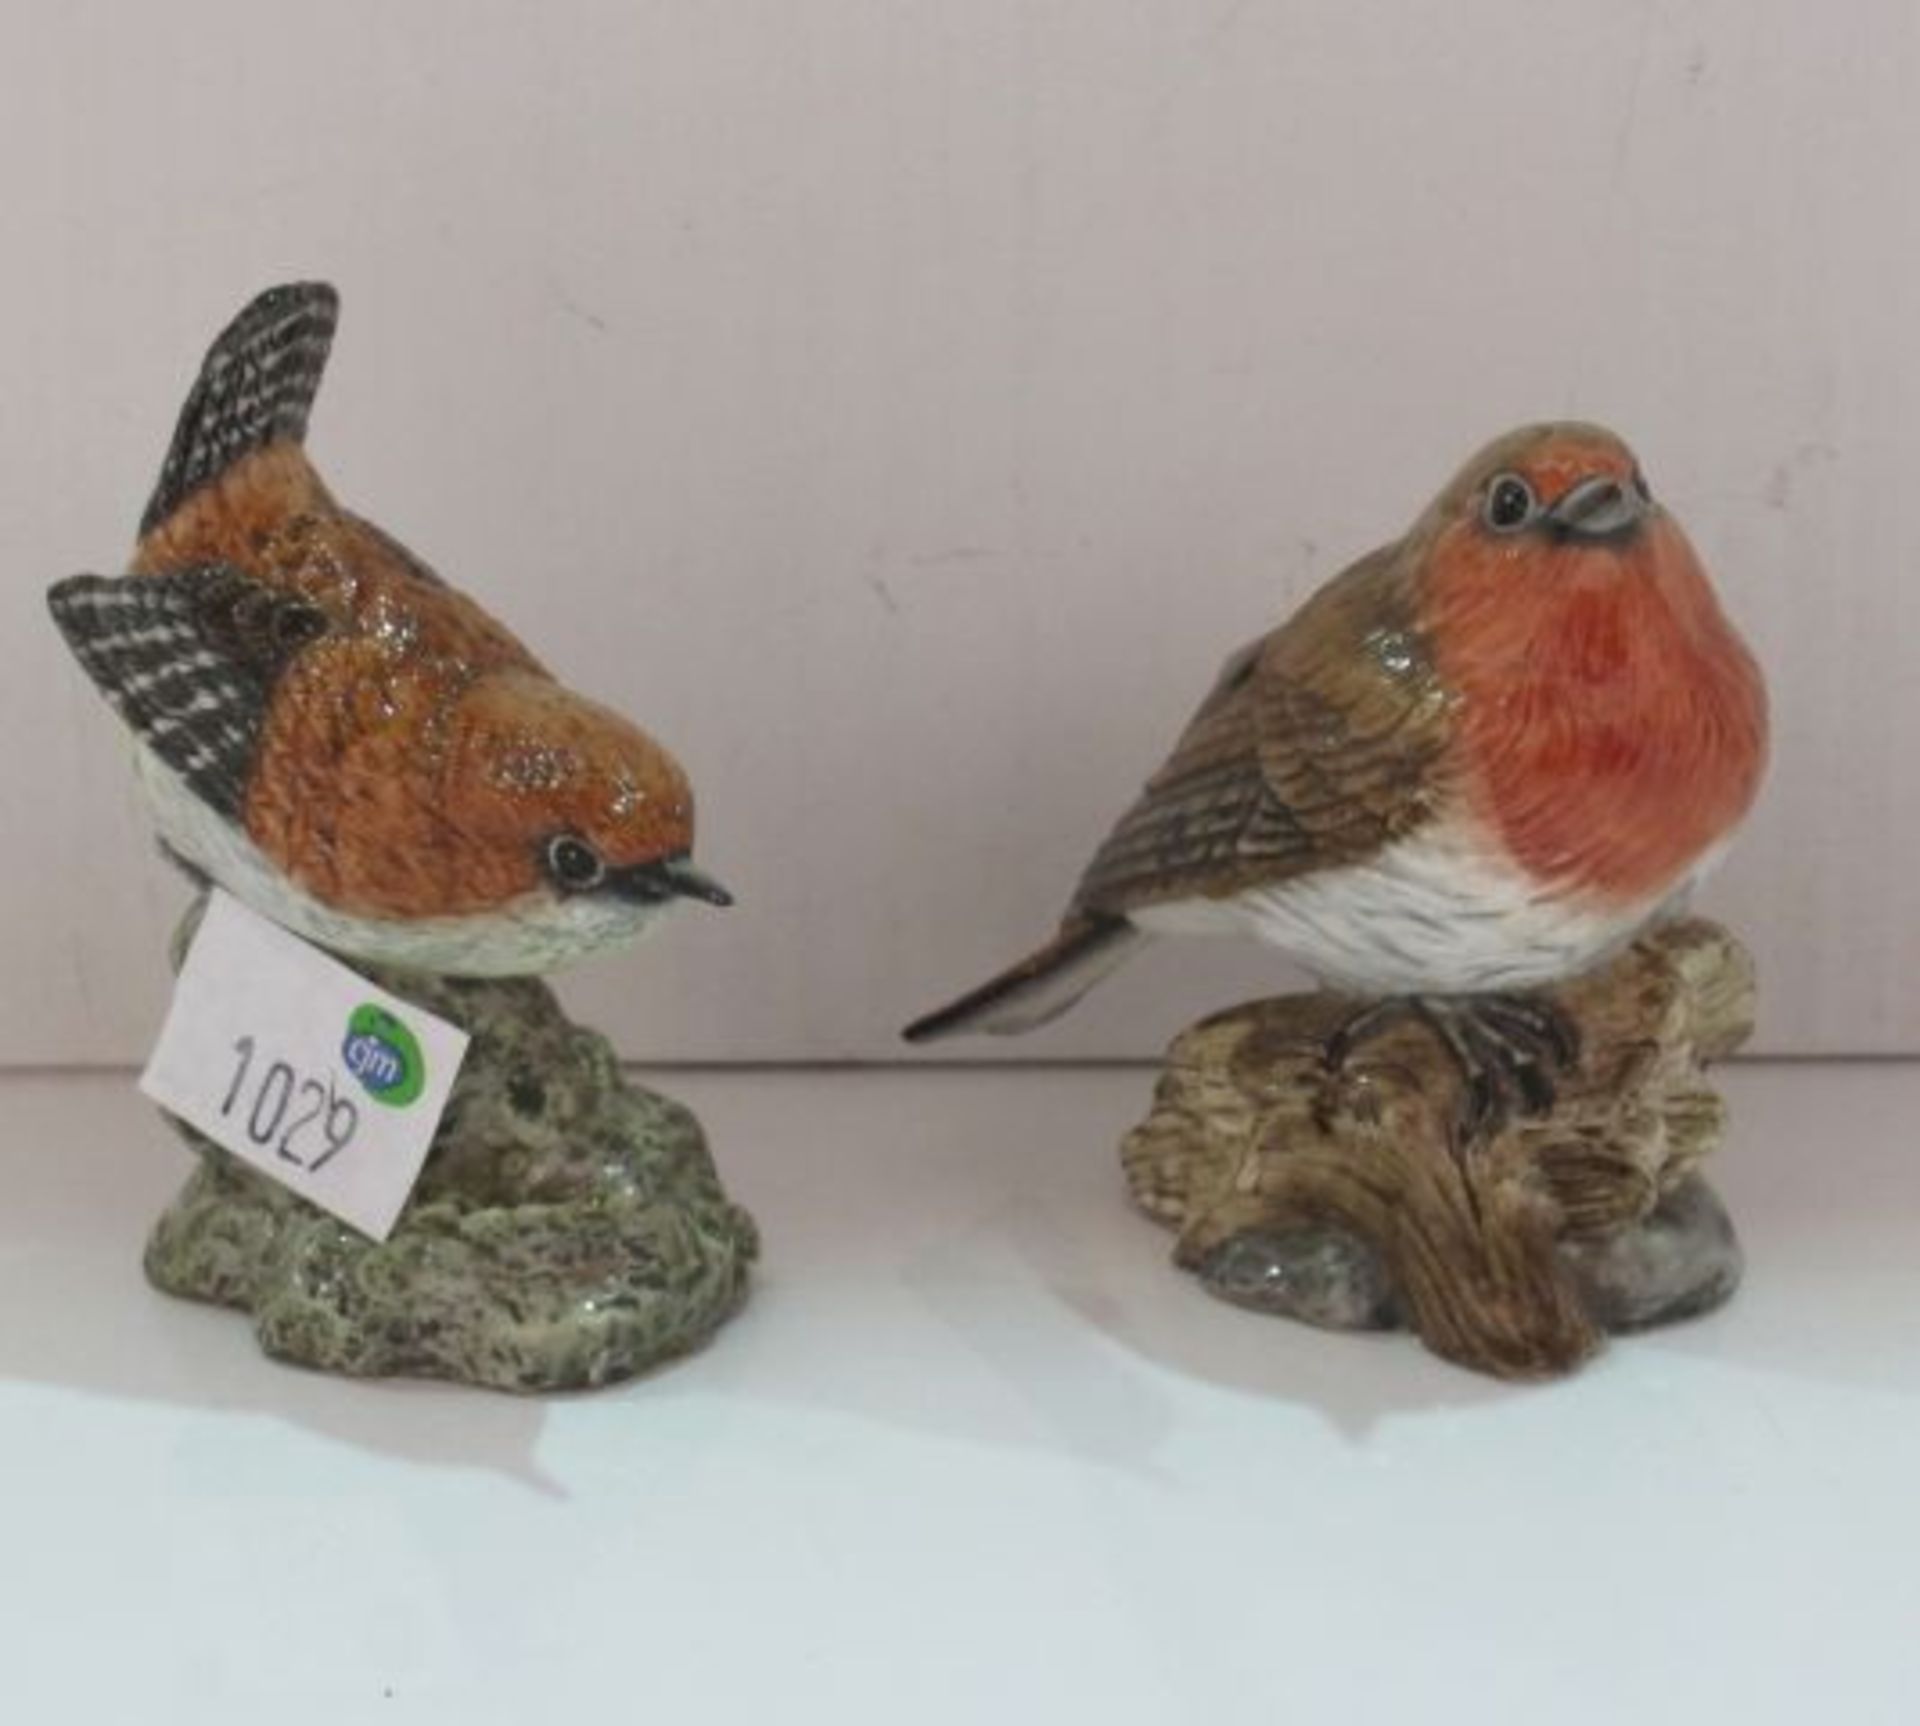 Two Hand Painted Mack Fine Bone China Figures - A Wren and a Robin, Signed J. Mack (est. £30-£50)